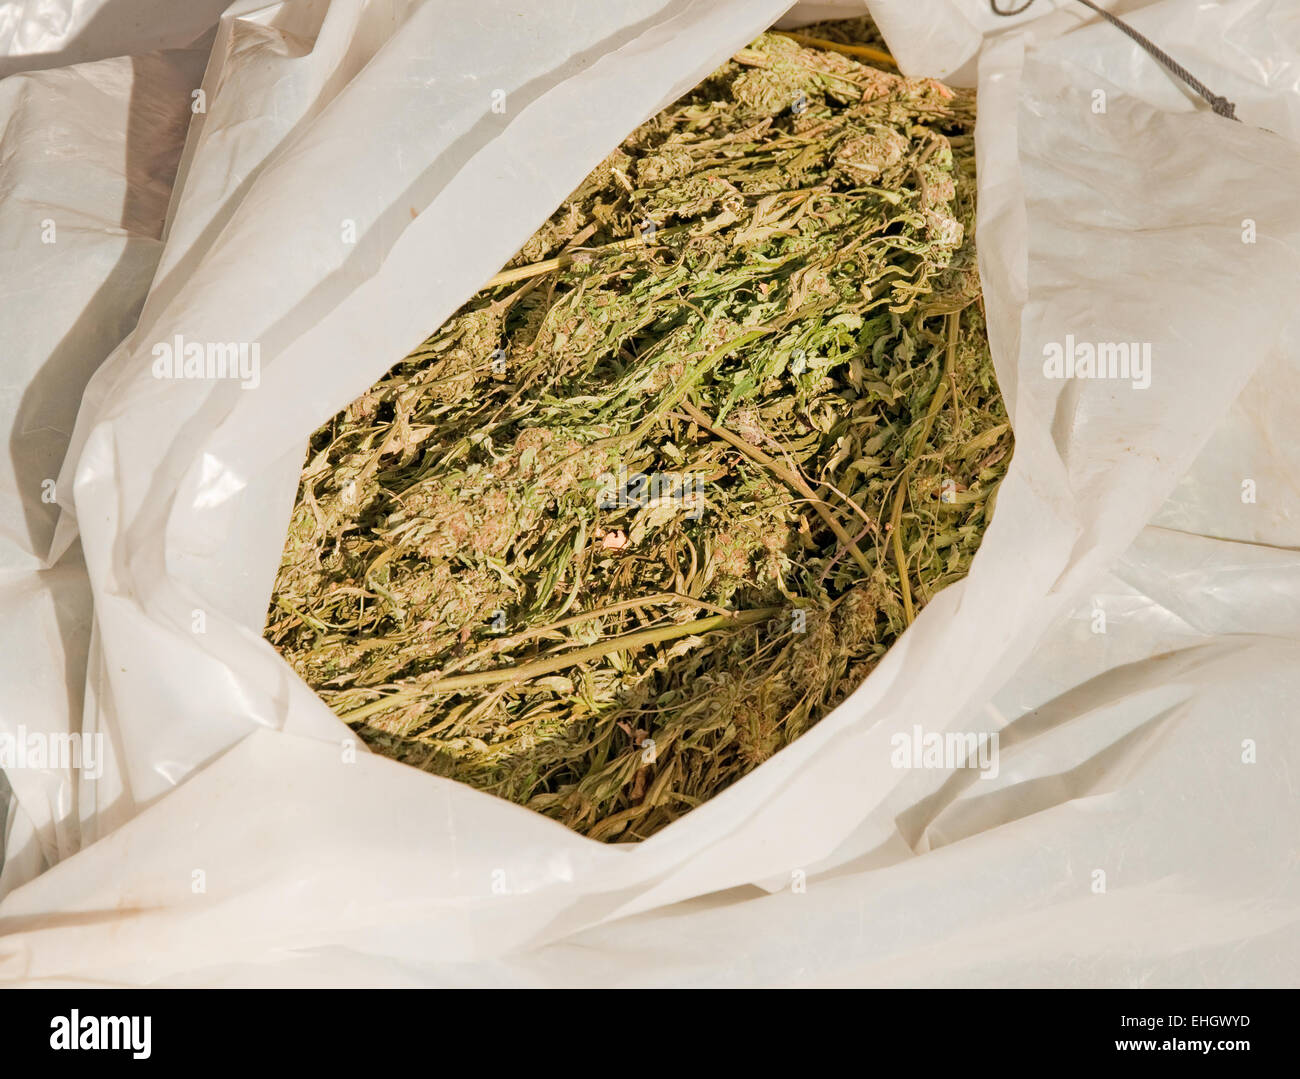 Bundle of confiscated marijuana plants wrapped in plastic Stock Photo